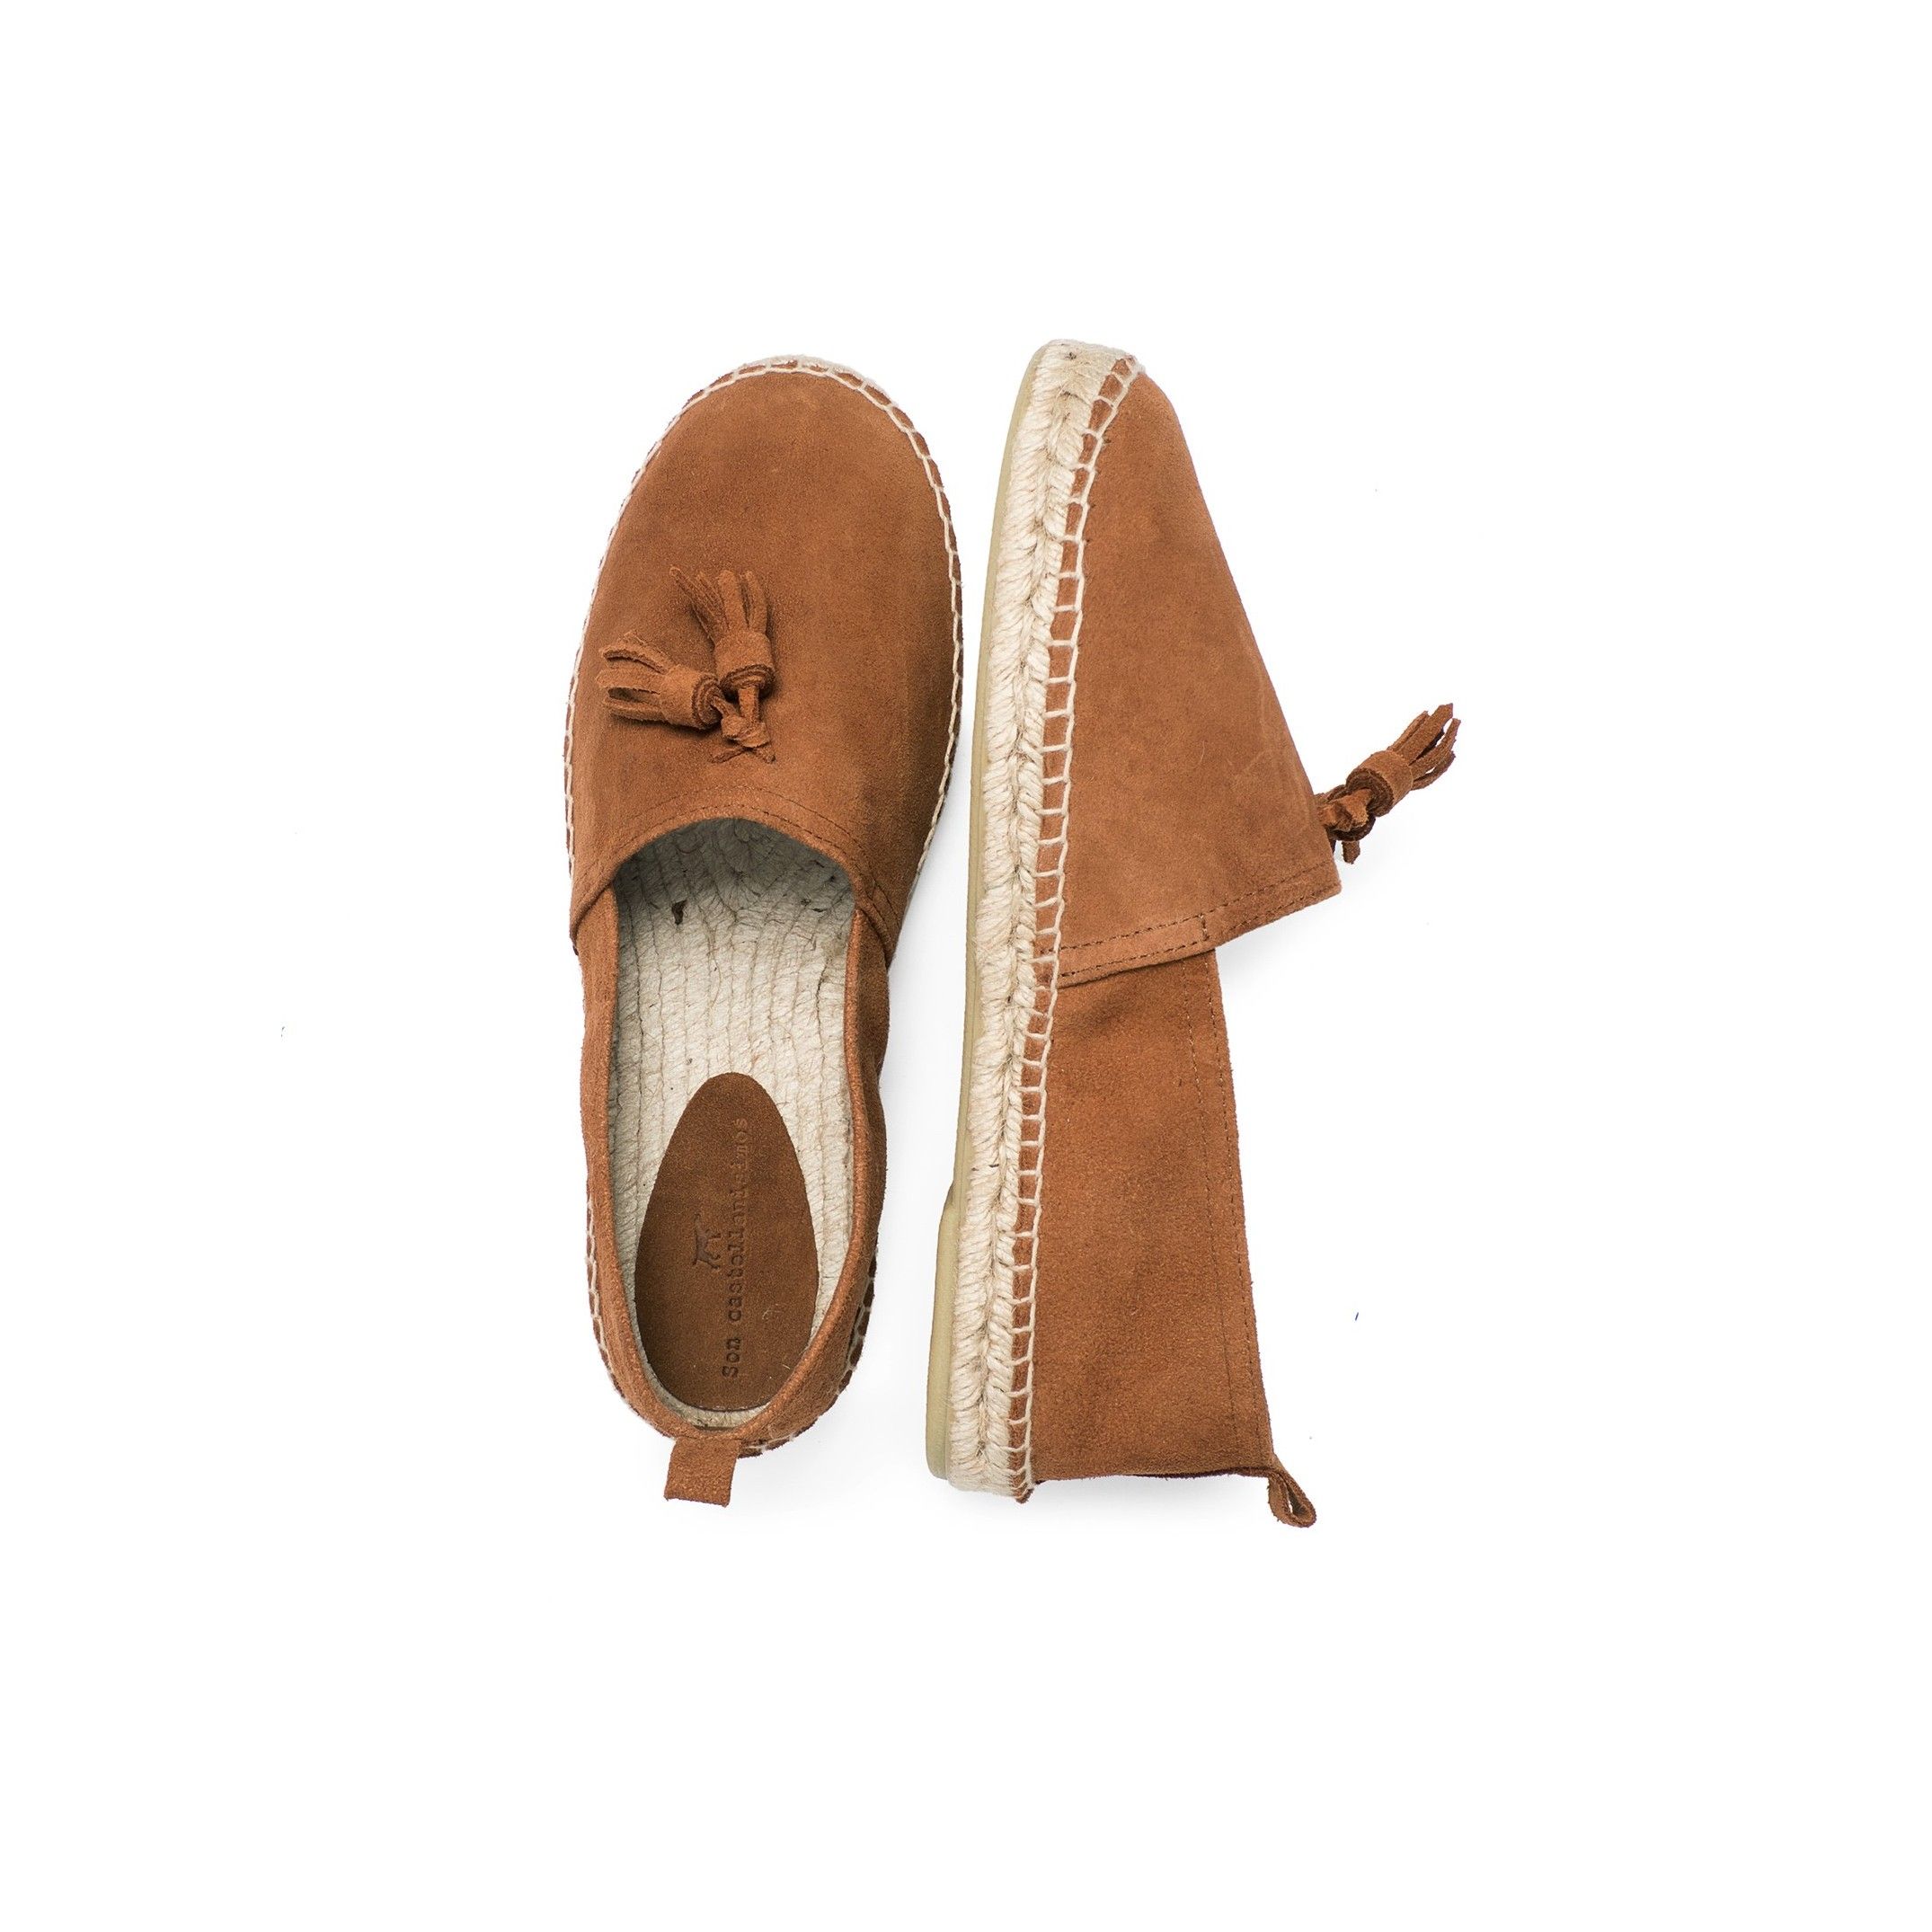 Split leather flat espadrilles with tassels, by Castellanisimos. Upper made of cowhide leather. Inner lining and insole: 25% cowhide leather and 75% of textile. Sole material: synthetic and non slip. Heel height: 2 cm. Designed and made in Spain.